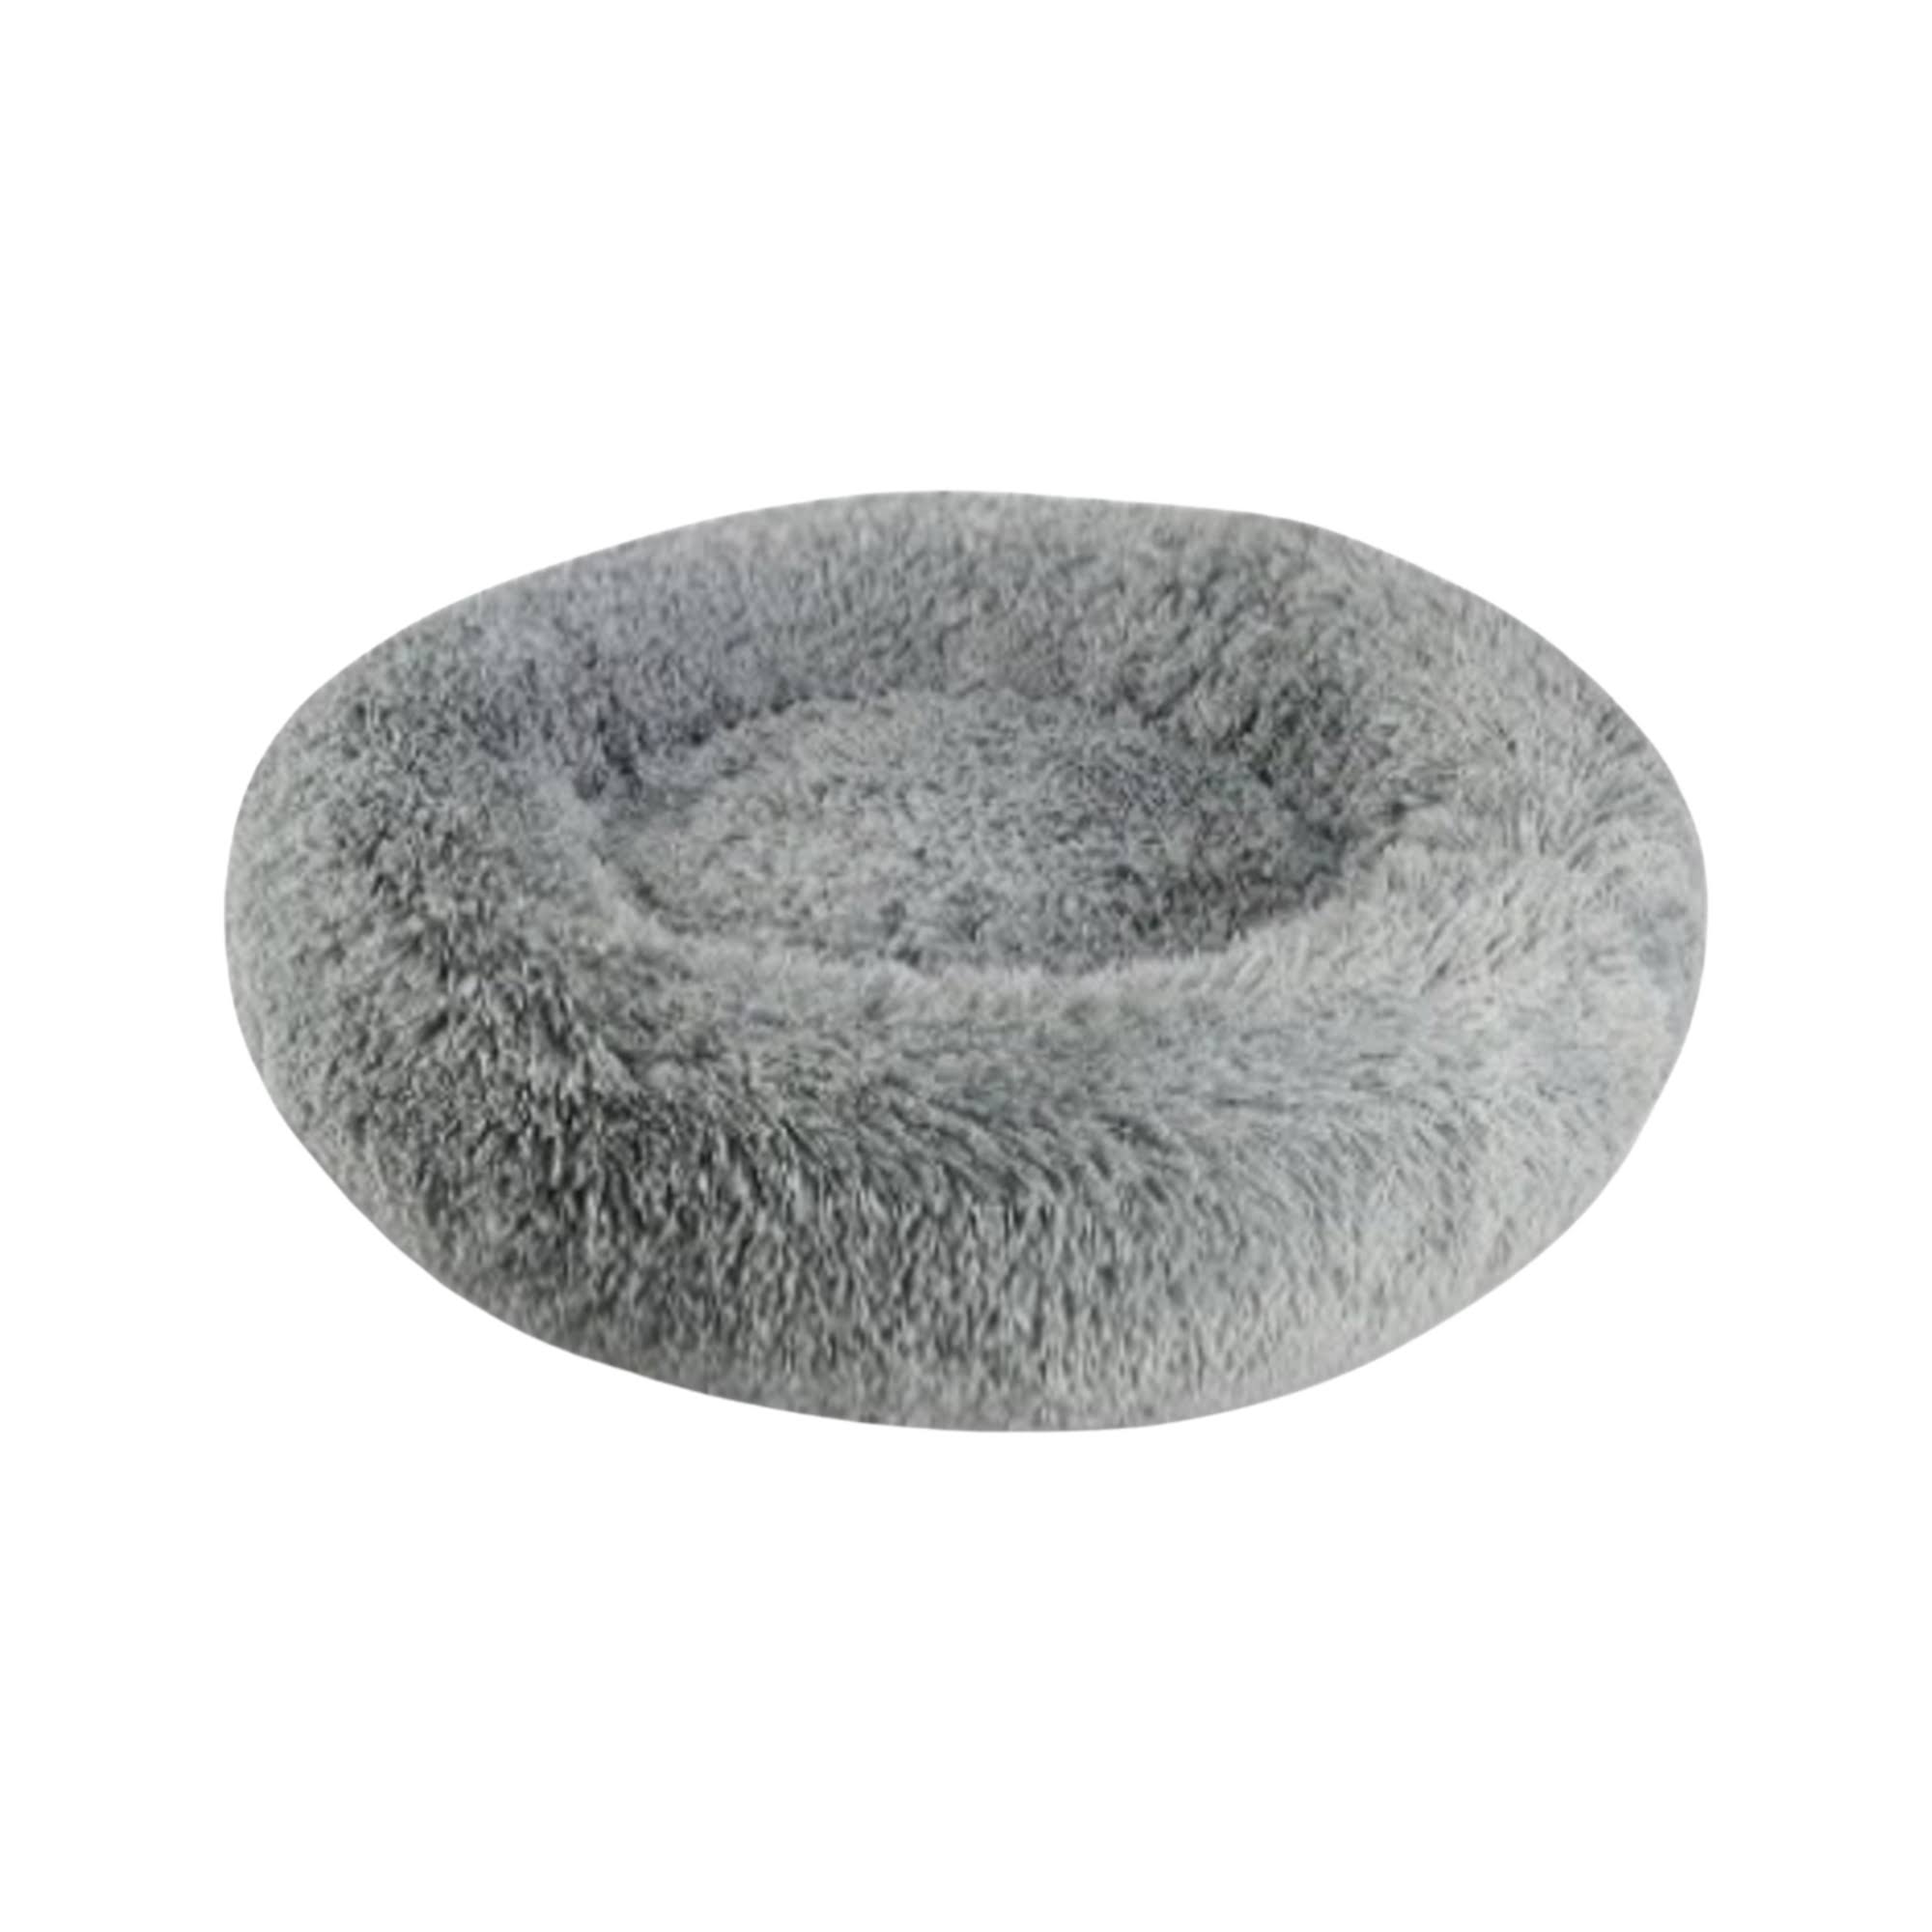 Arlee Shaggy Donut Bed Charcoal, Large